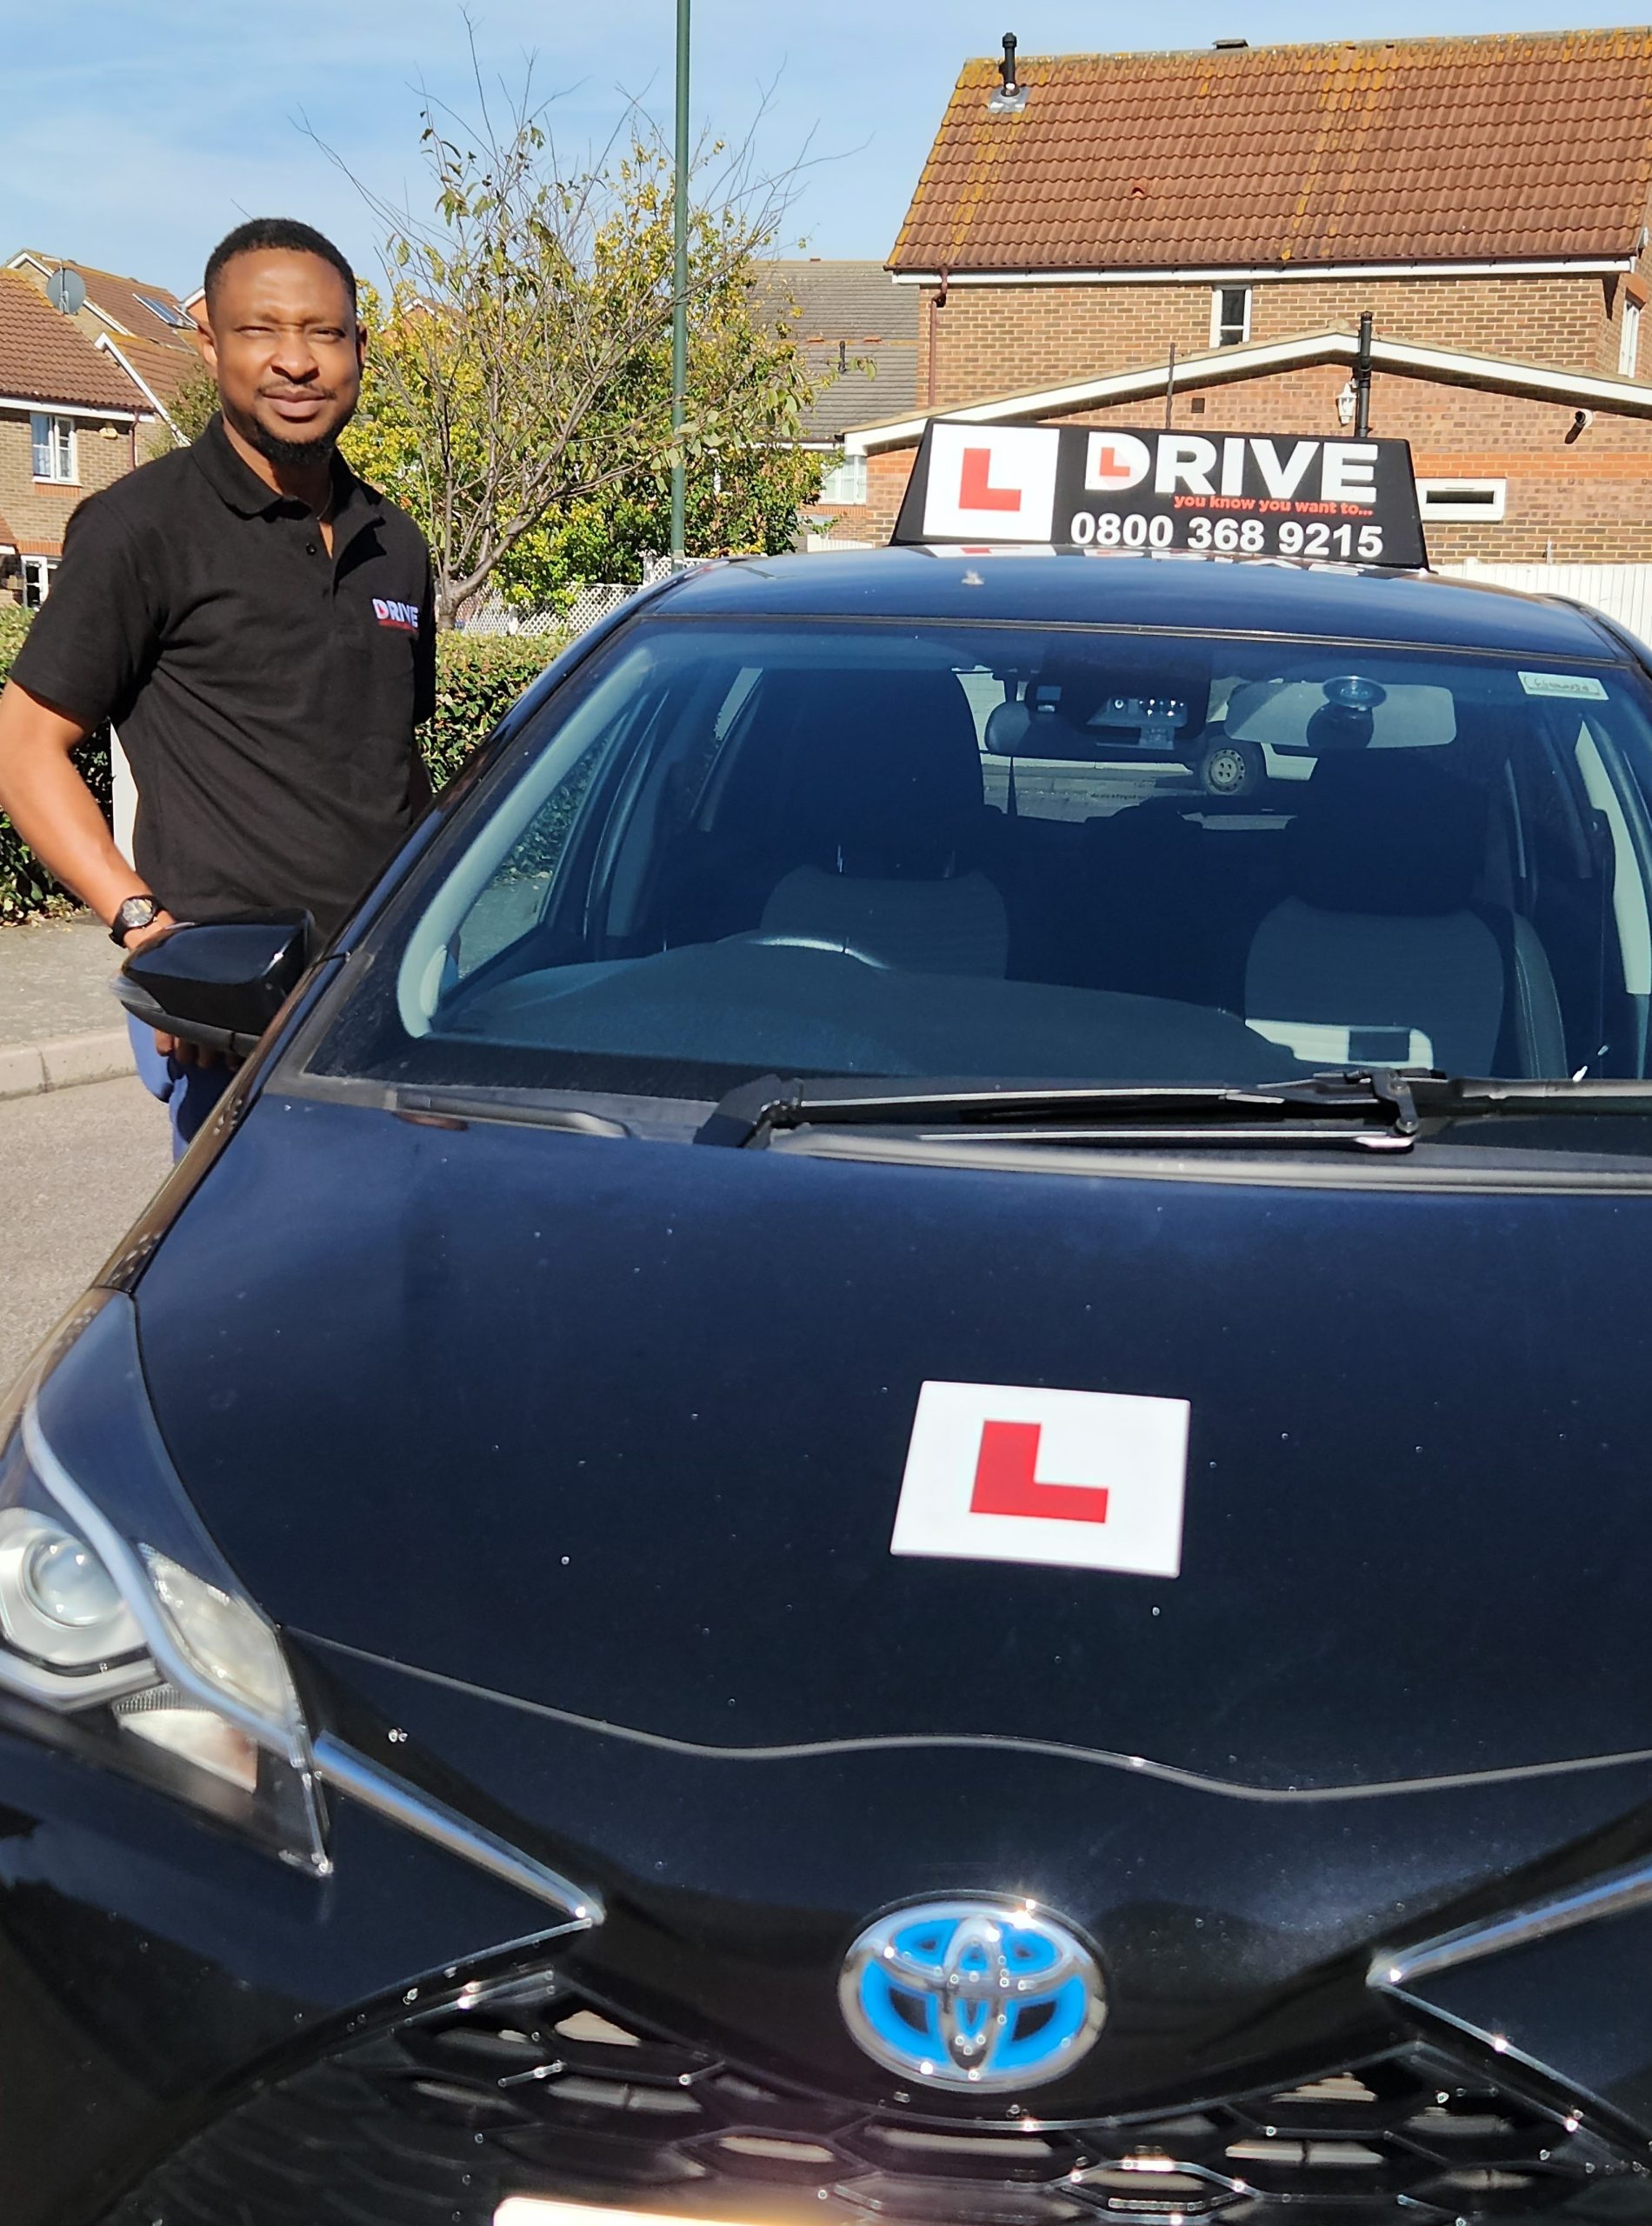 DRIVE Driving School Instructor